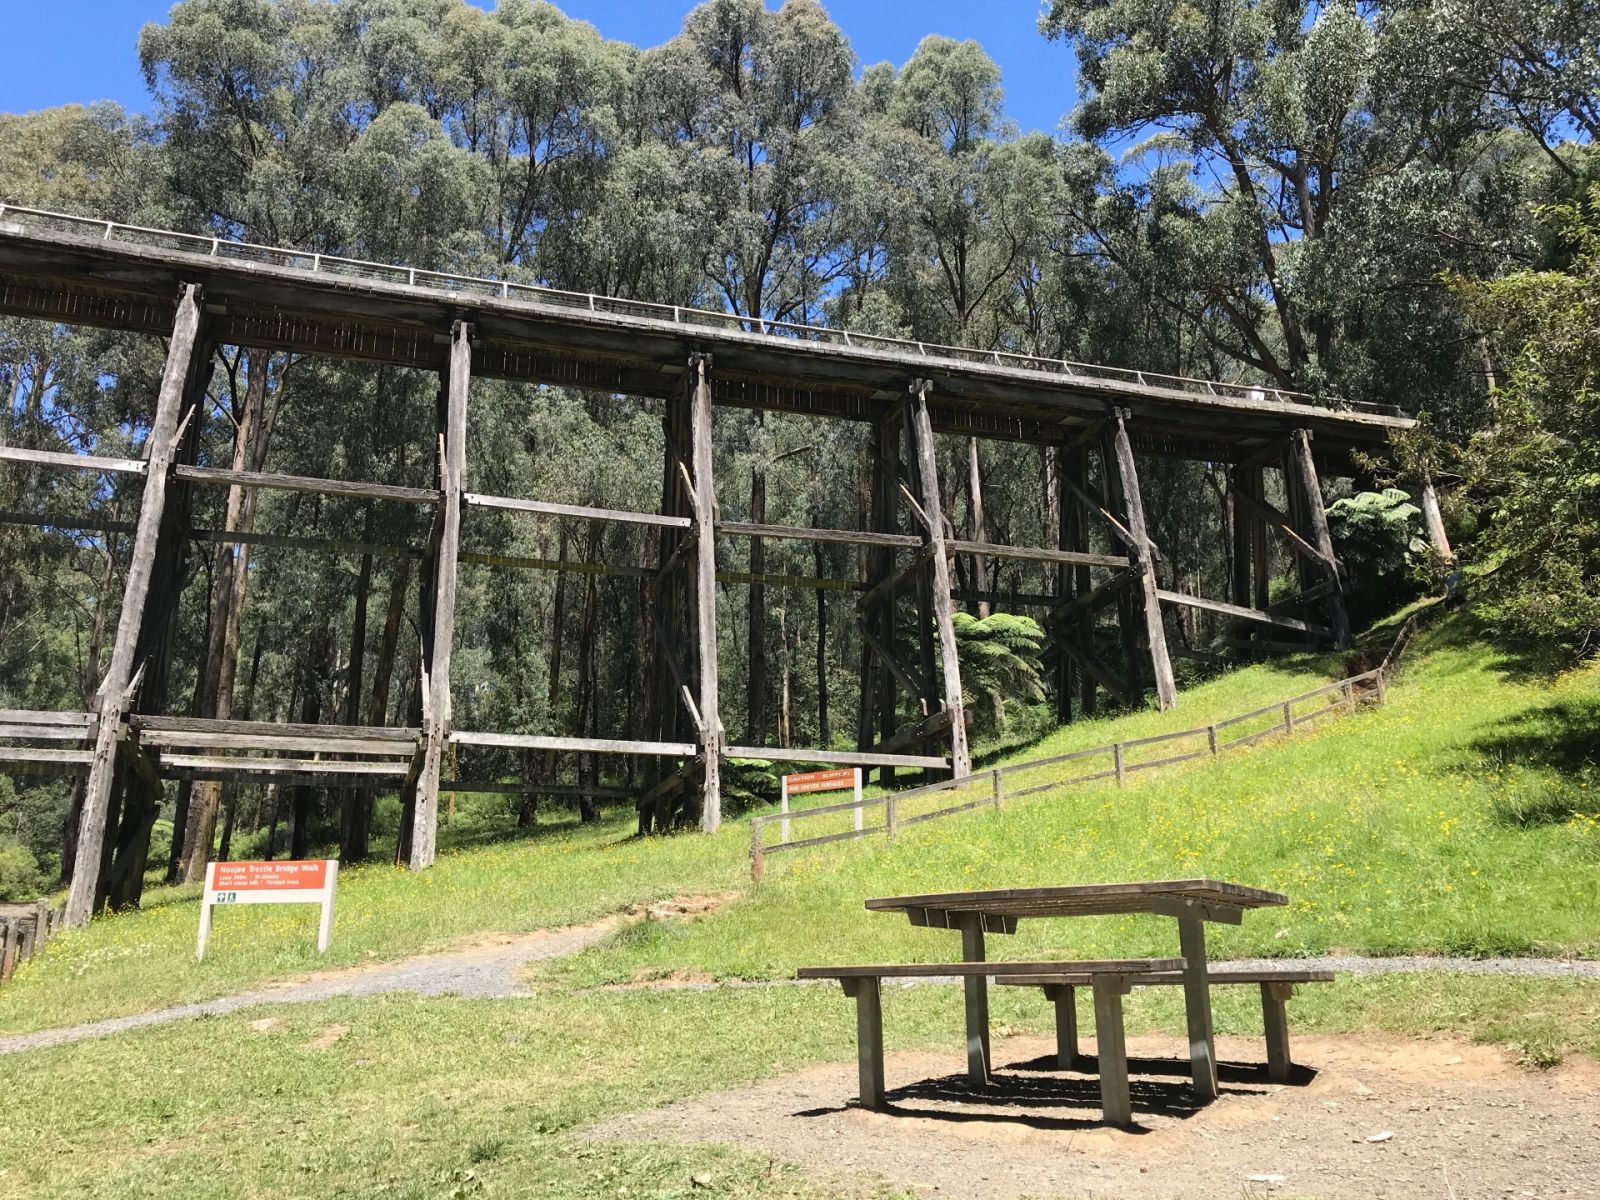 A picnic table on a grassy slope below the Noojee Trestle Bridge